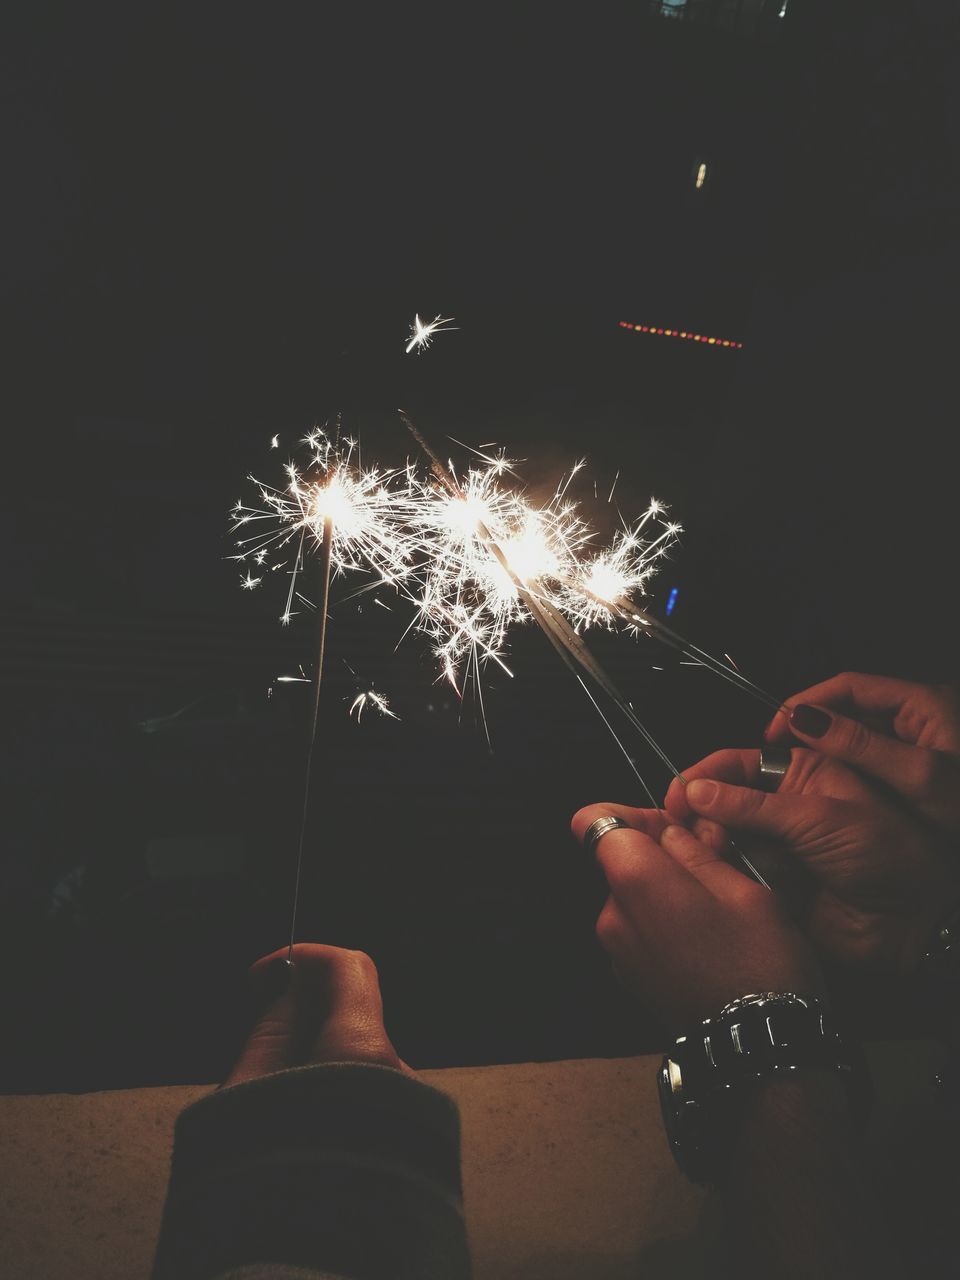 human hand, human body part, night, low angle view, people, adults only, firework - man made object, men, celebration, firework display, sparkler, adult, women, motion, one person, exploding, illuminated, only men, black background, teamwork, outdoors, firework